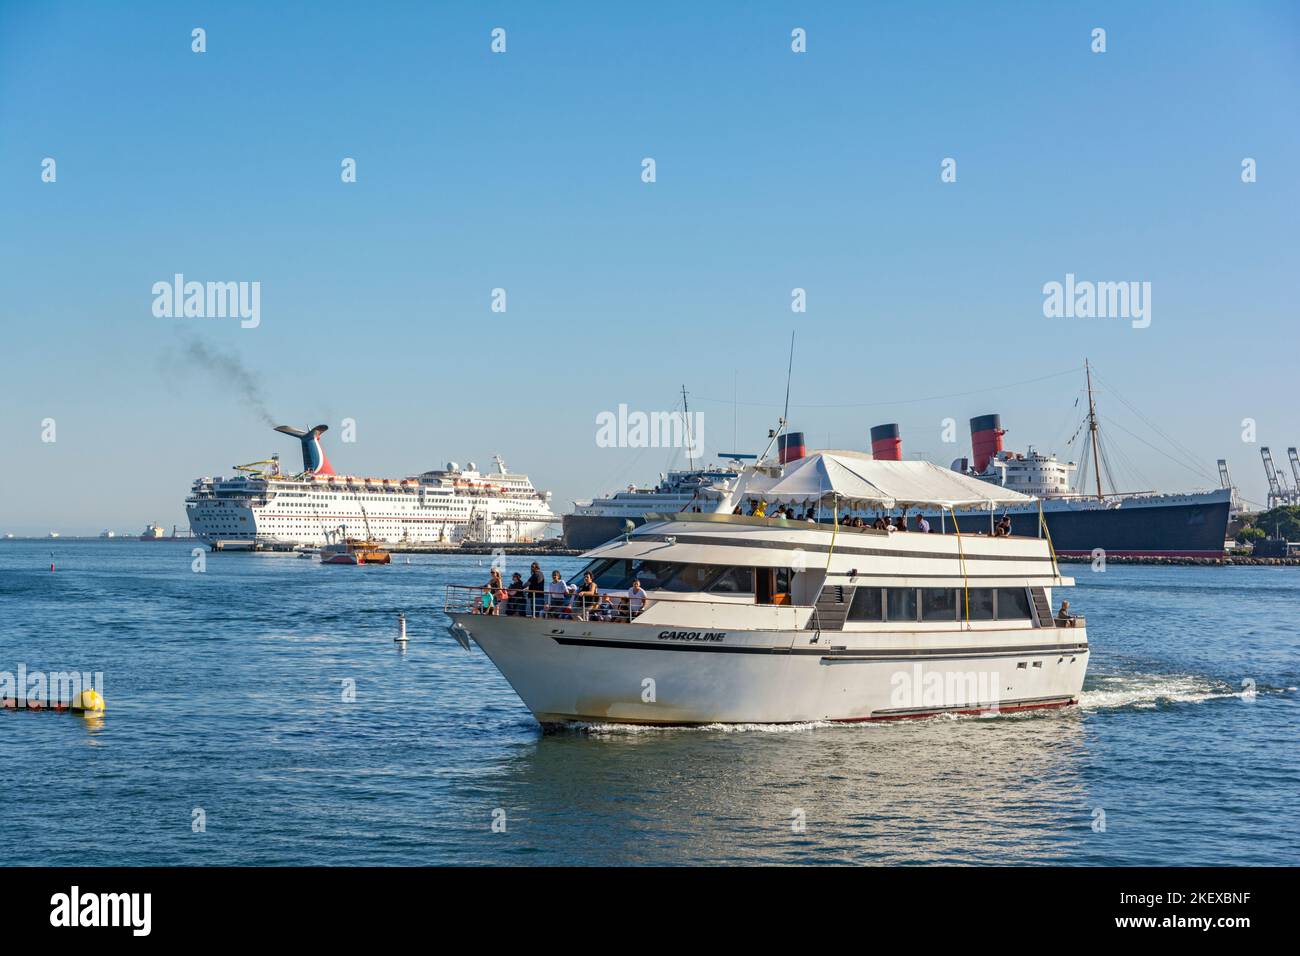 California, Long Beach, harbor cruise boat, The Queen Mary floating hotel, Carnival cruise ship Stock Photo